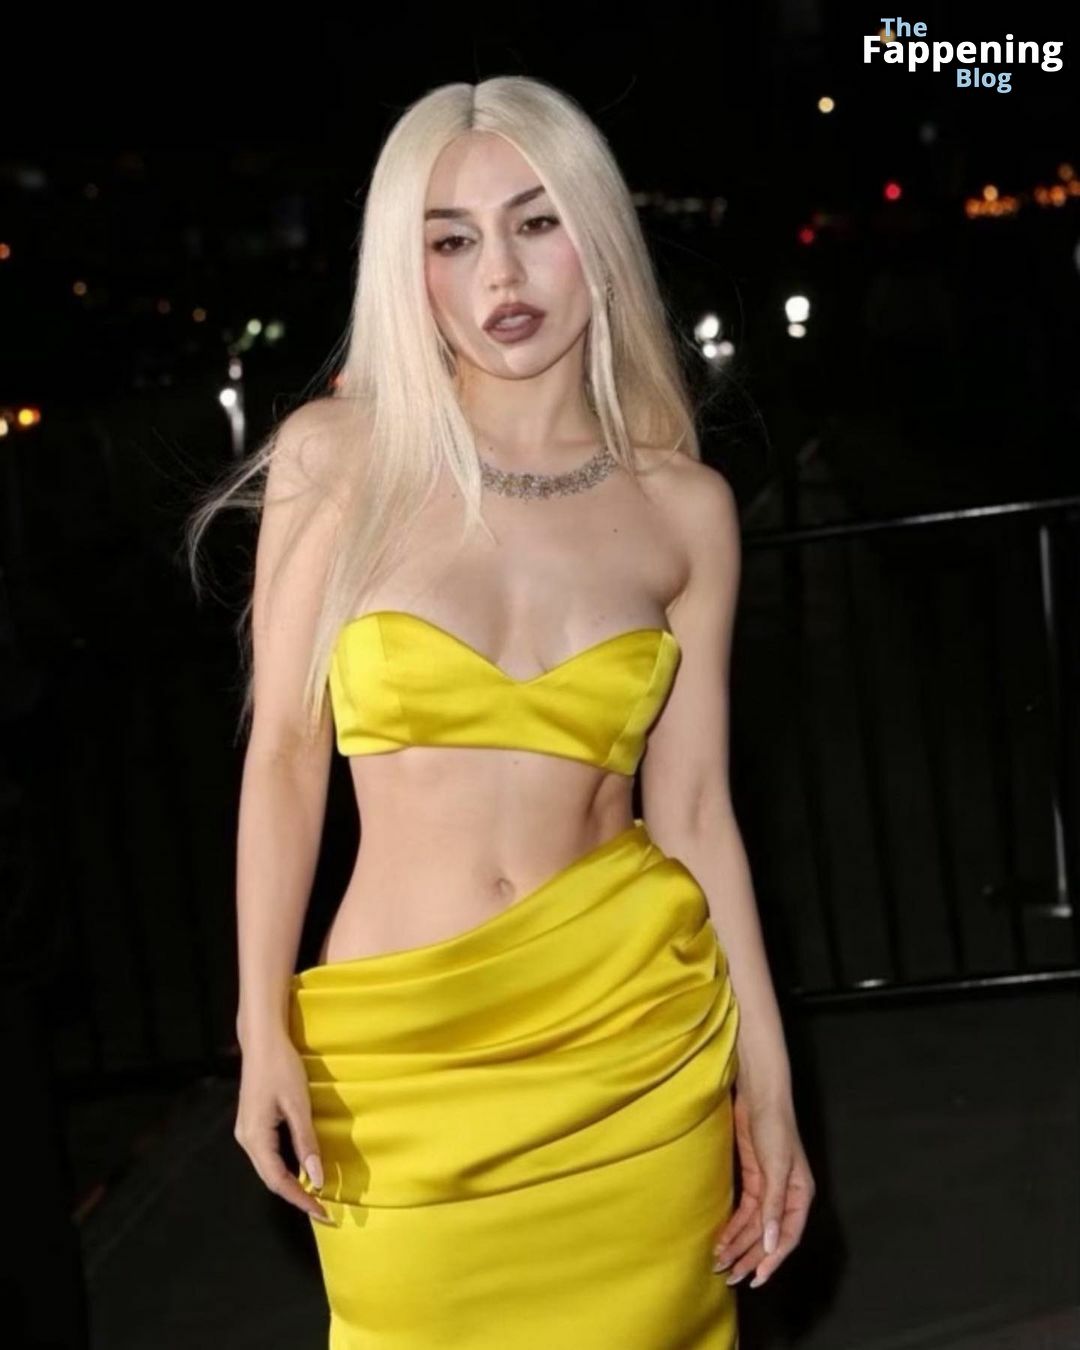 Ava-Max-Yellow-Outfit-Braless-Cleavage-7-1-thefappeningblog.com_.jpg